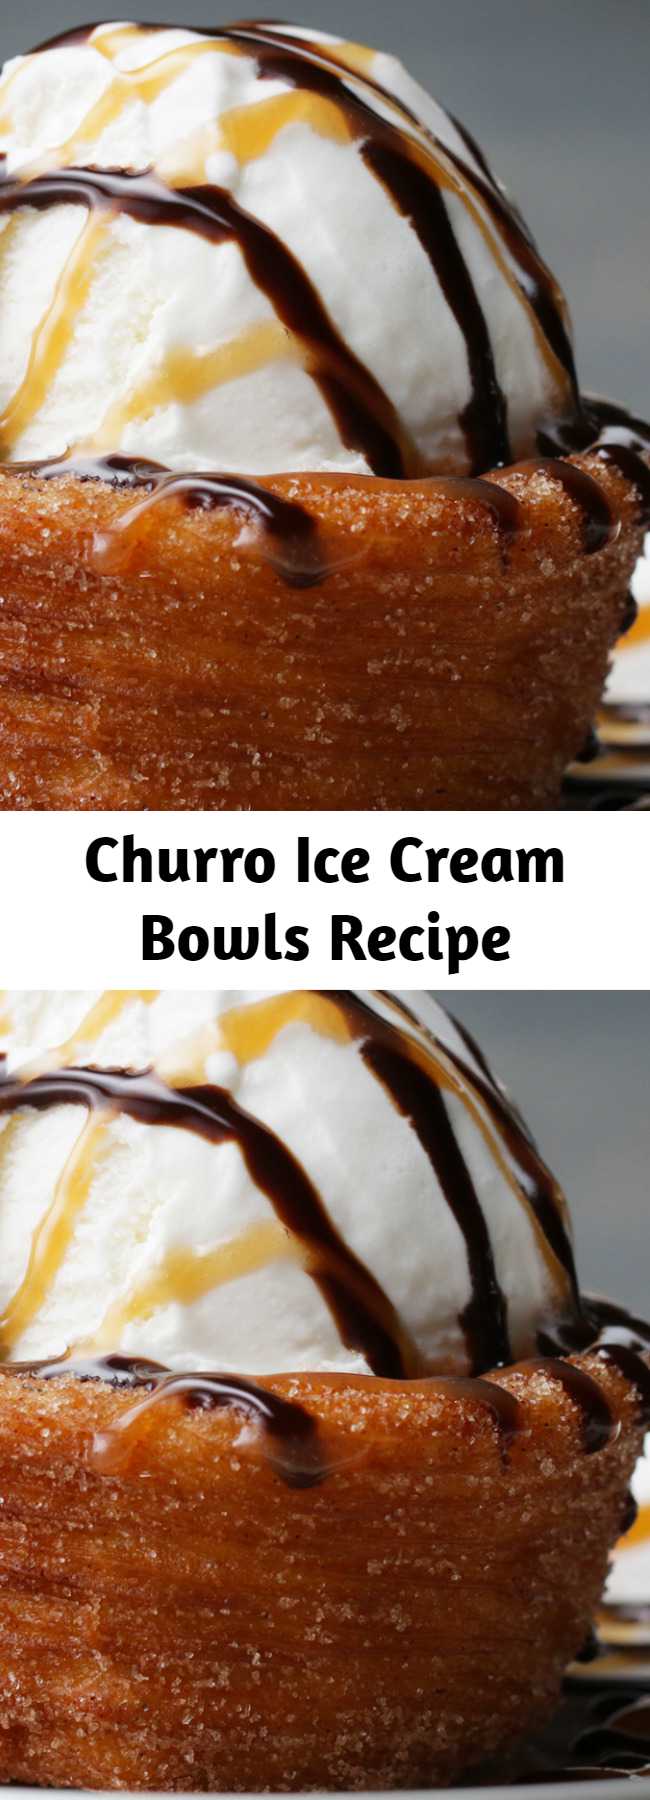 Churro Ice Cream Bowls Recipe - Add a lot of cooking spray to the pan! Also make sure the churro dough is completely frozen! This was so good! Try it with horchata ice cream 🍨😋